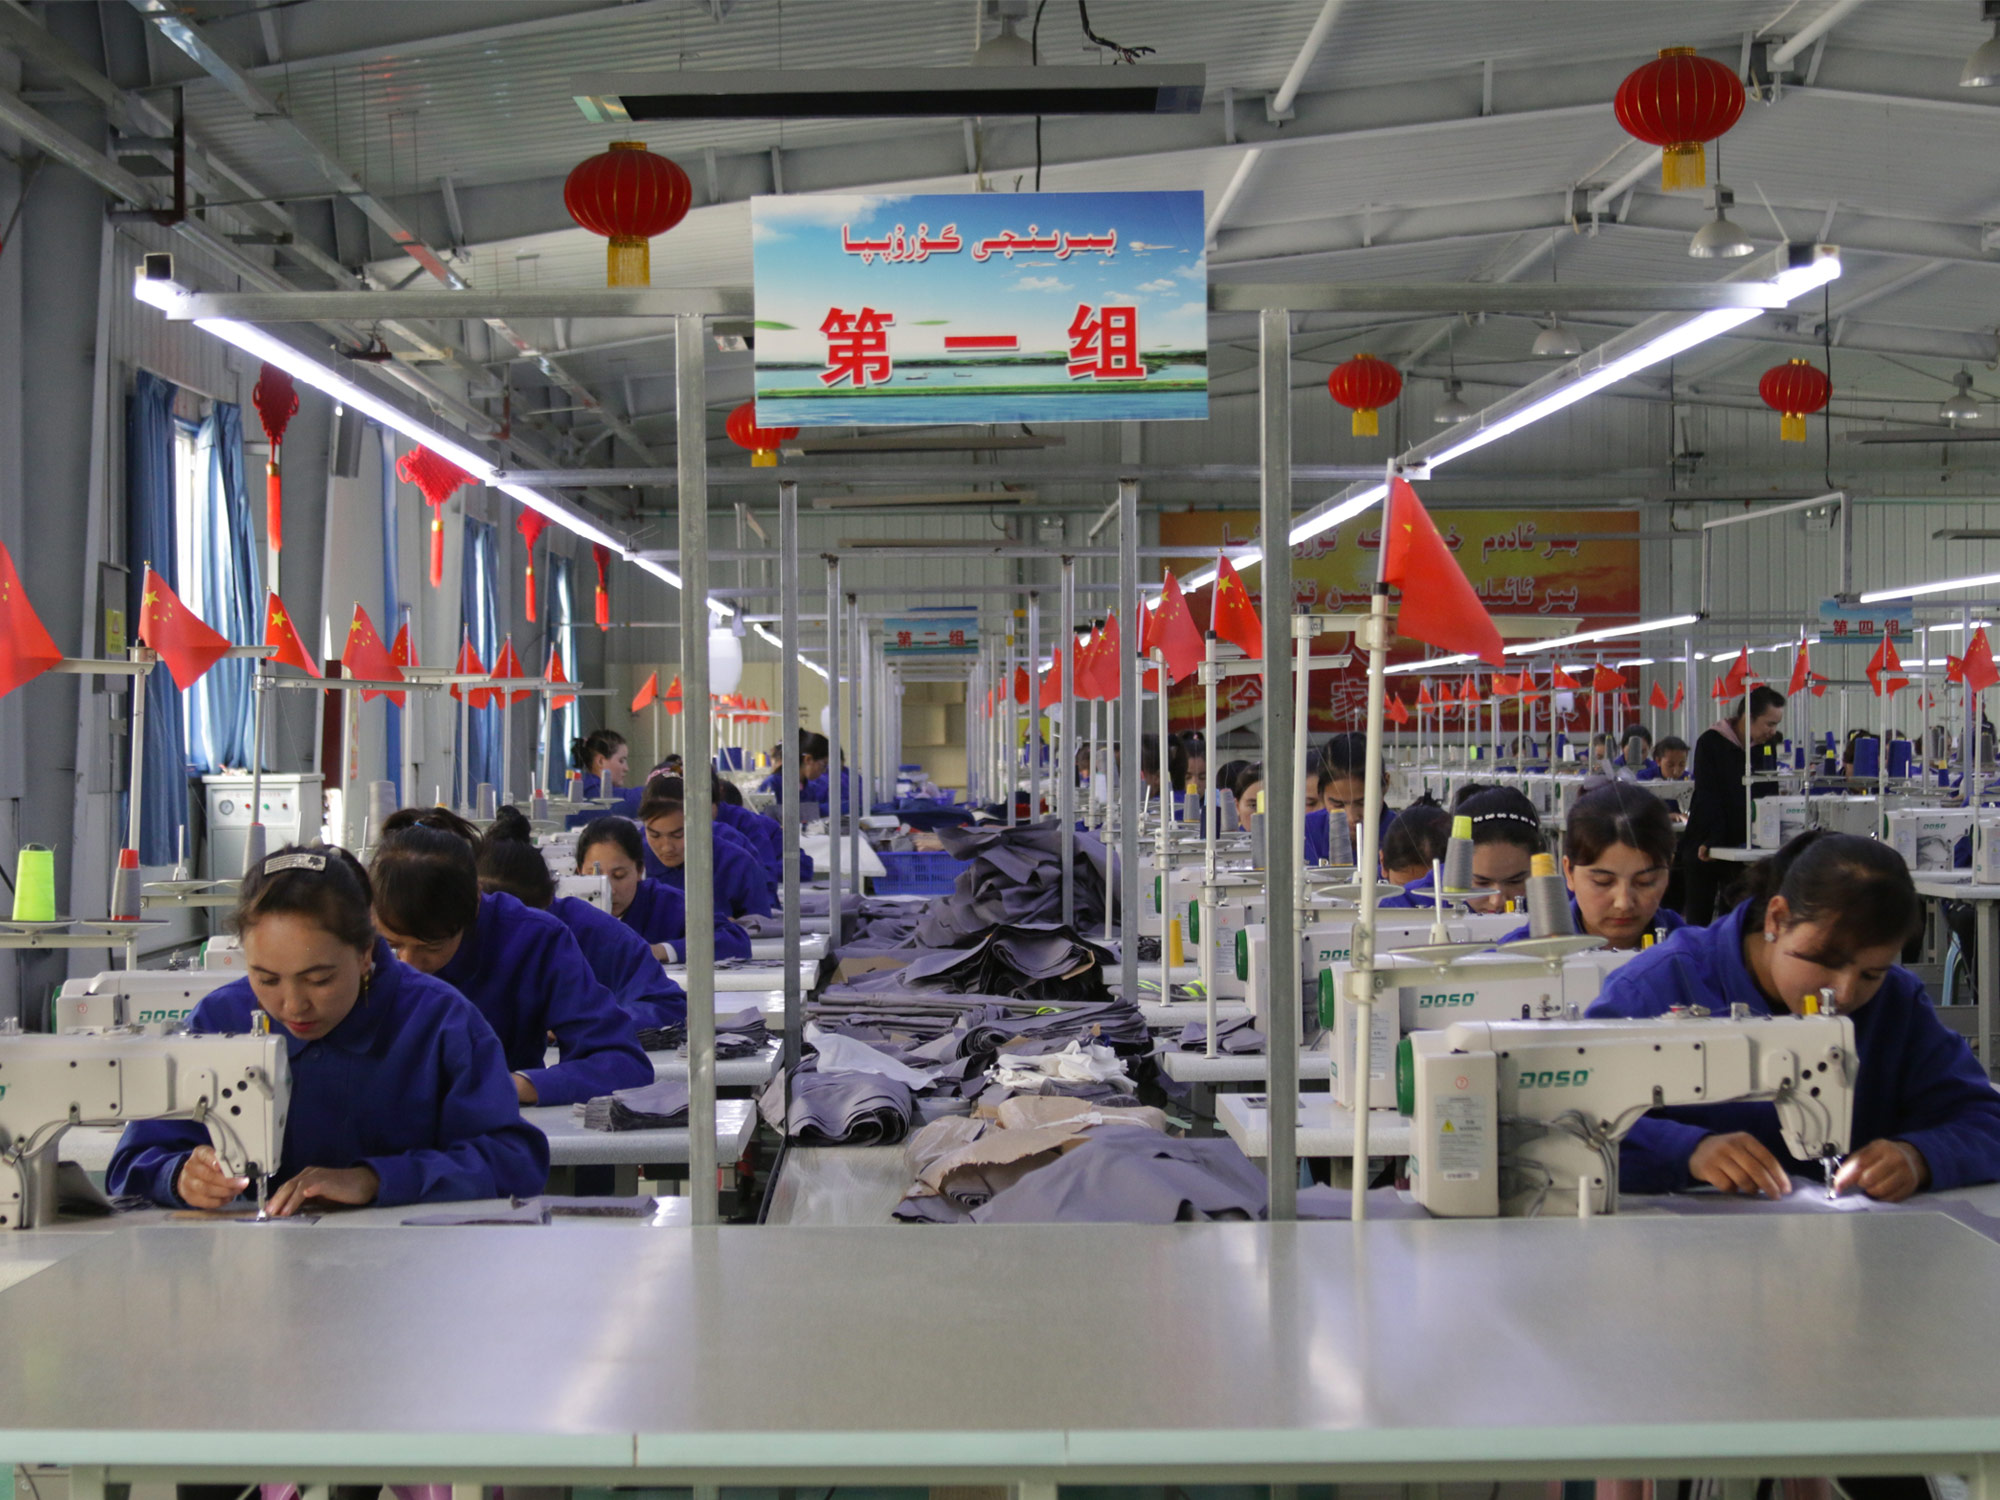 MEPs submit joint letter calling for an import ban on Chinese companies using forced labour